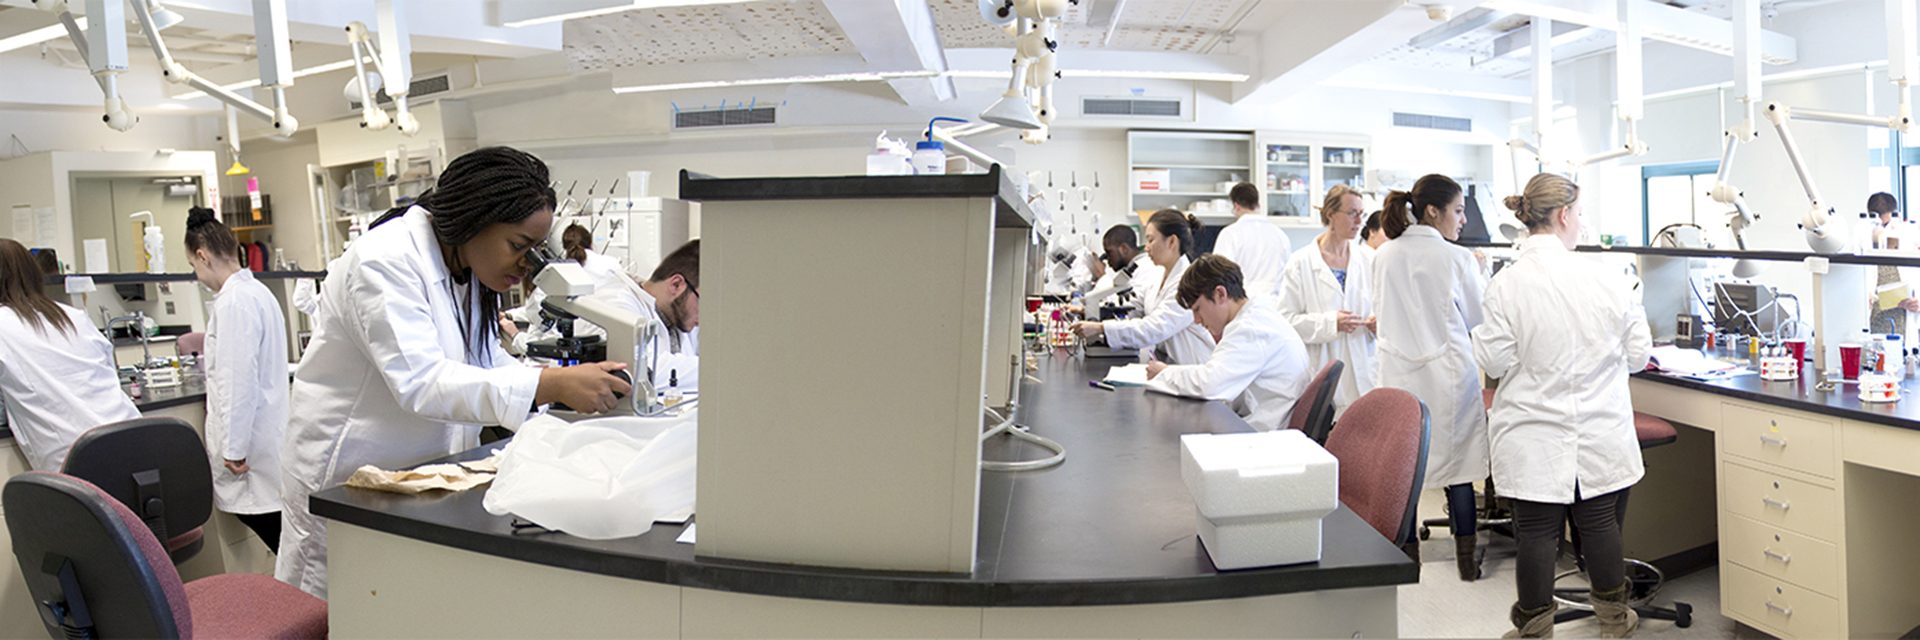 Students working in a science lab